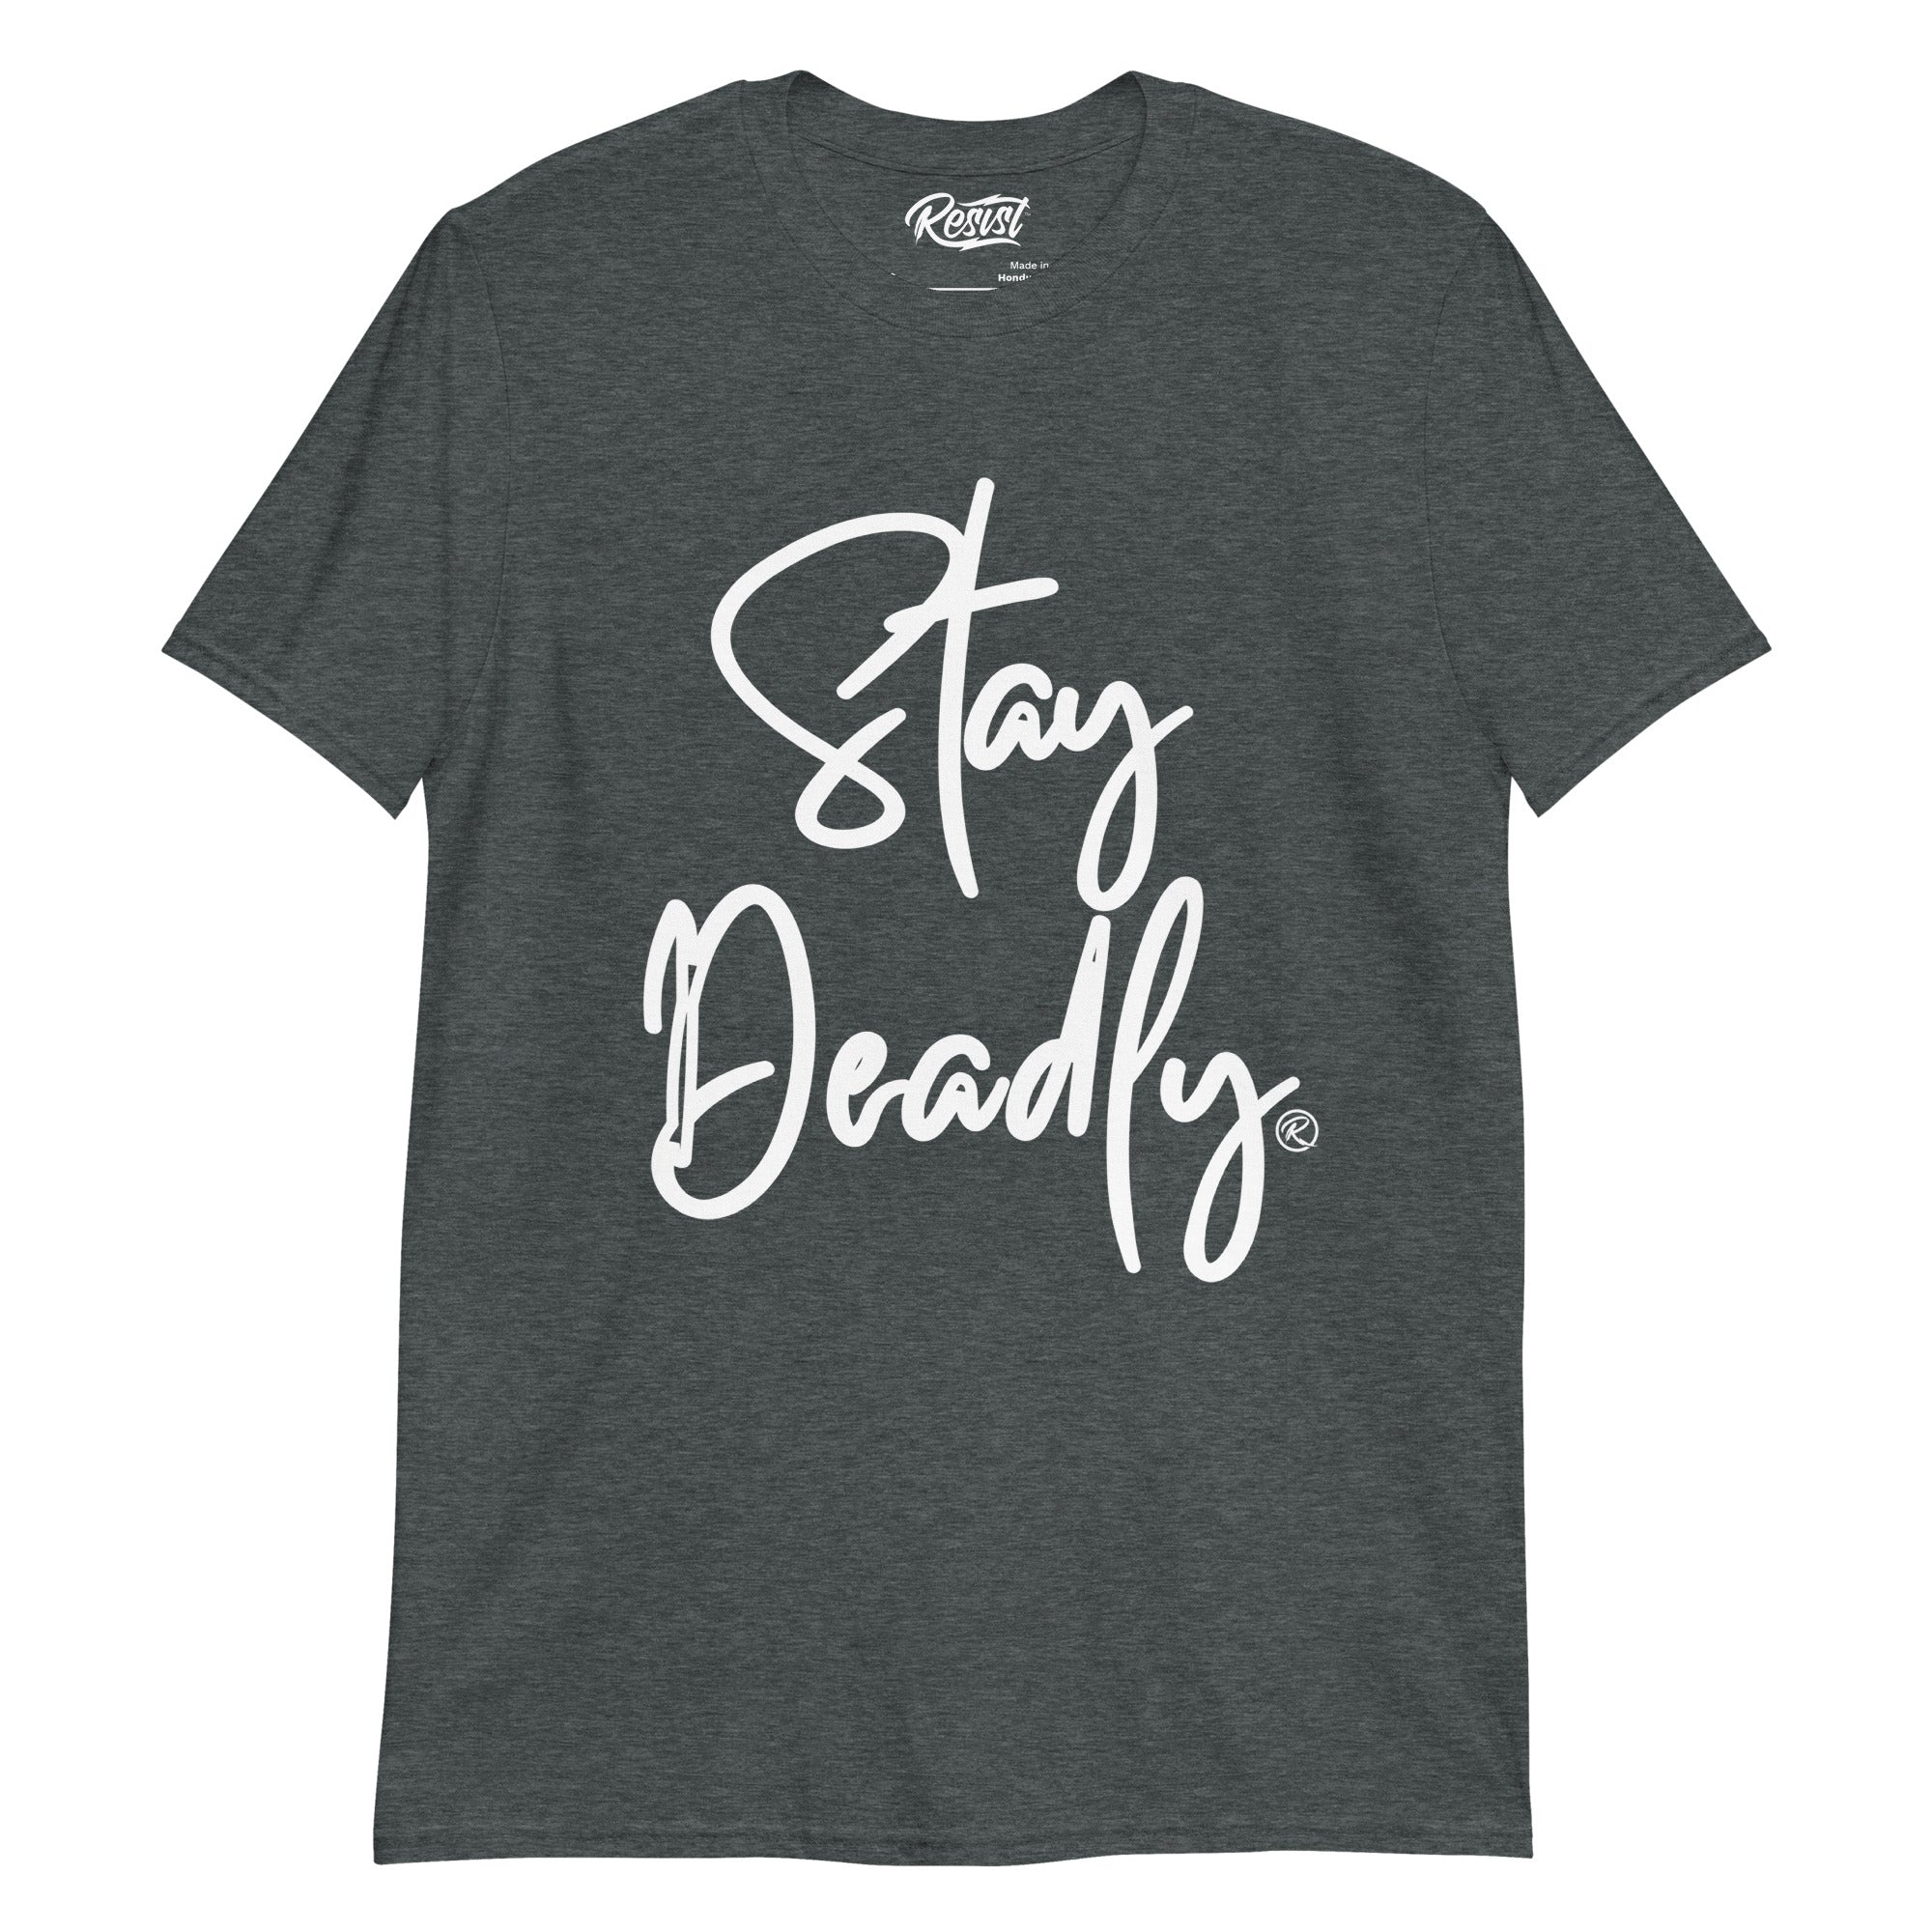 Stacked "Stay Deadly" T-shirt